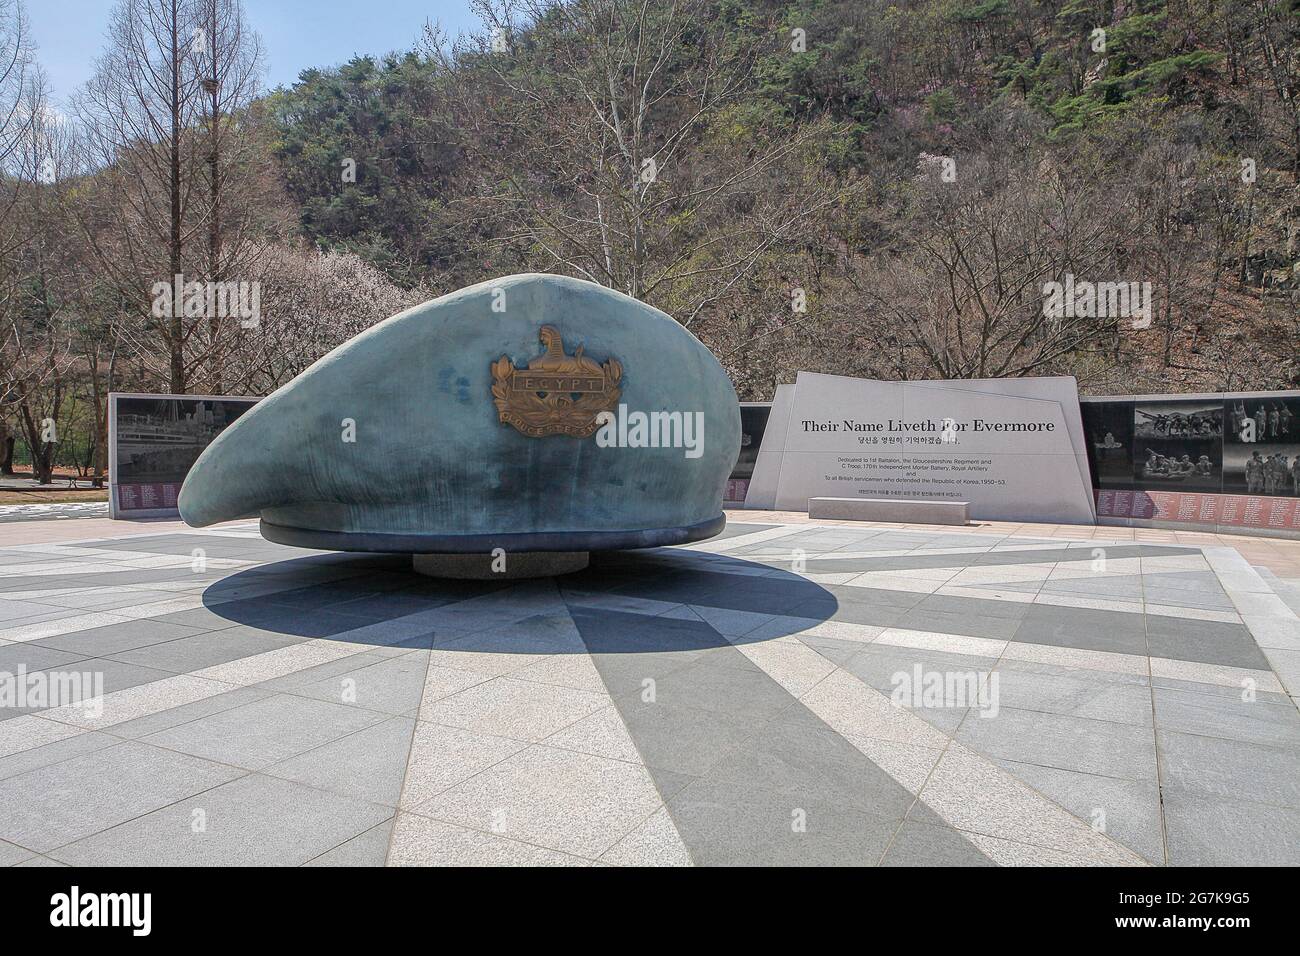 April 11, 2018-Goyang, South Korea-A View of Korean War England contingent monument of Gloster Hill Memorial Park in Paju, South Kroea. The memorial stands at the foot of Gloster Hill beside the Seolmacheon stream, the initial location of the Gloucestershire Regiment's headquarters during the battle at Imjin River. It was built by units of the British and South Korean armed forces as a memorial to the Gloucestershire Regiment and C Troop, 170th Mortar Battery, Royal Artillery. Stock Photo